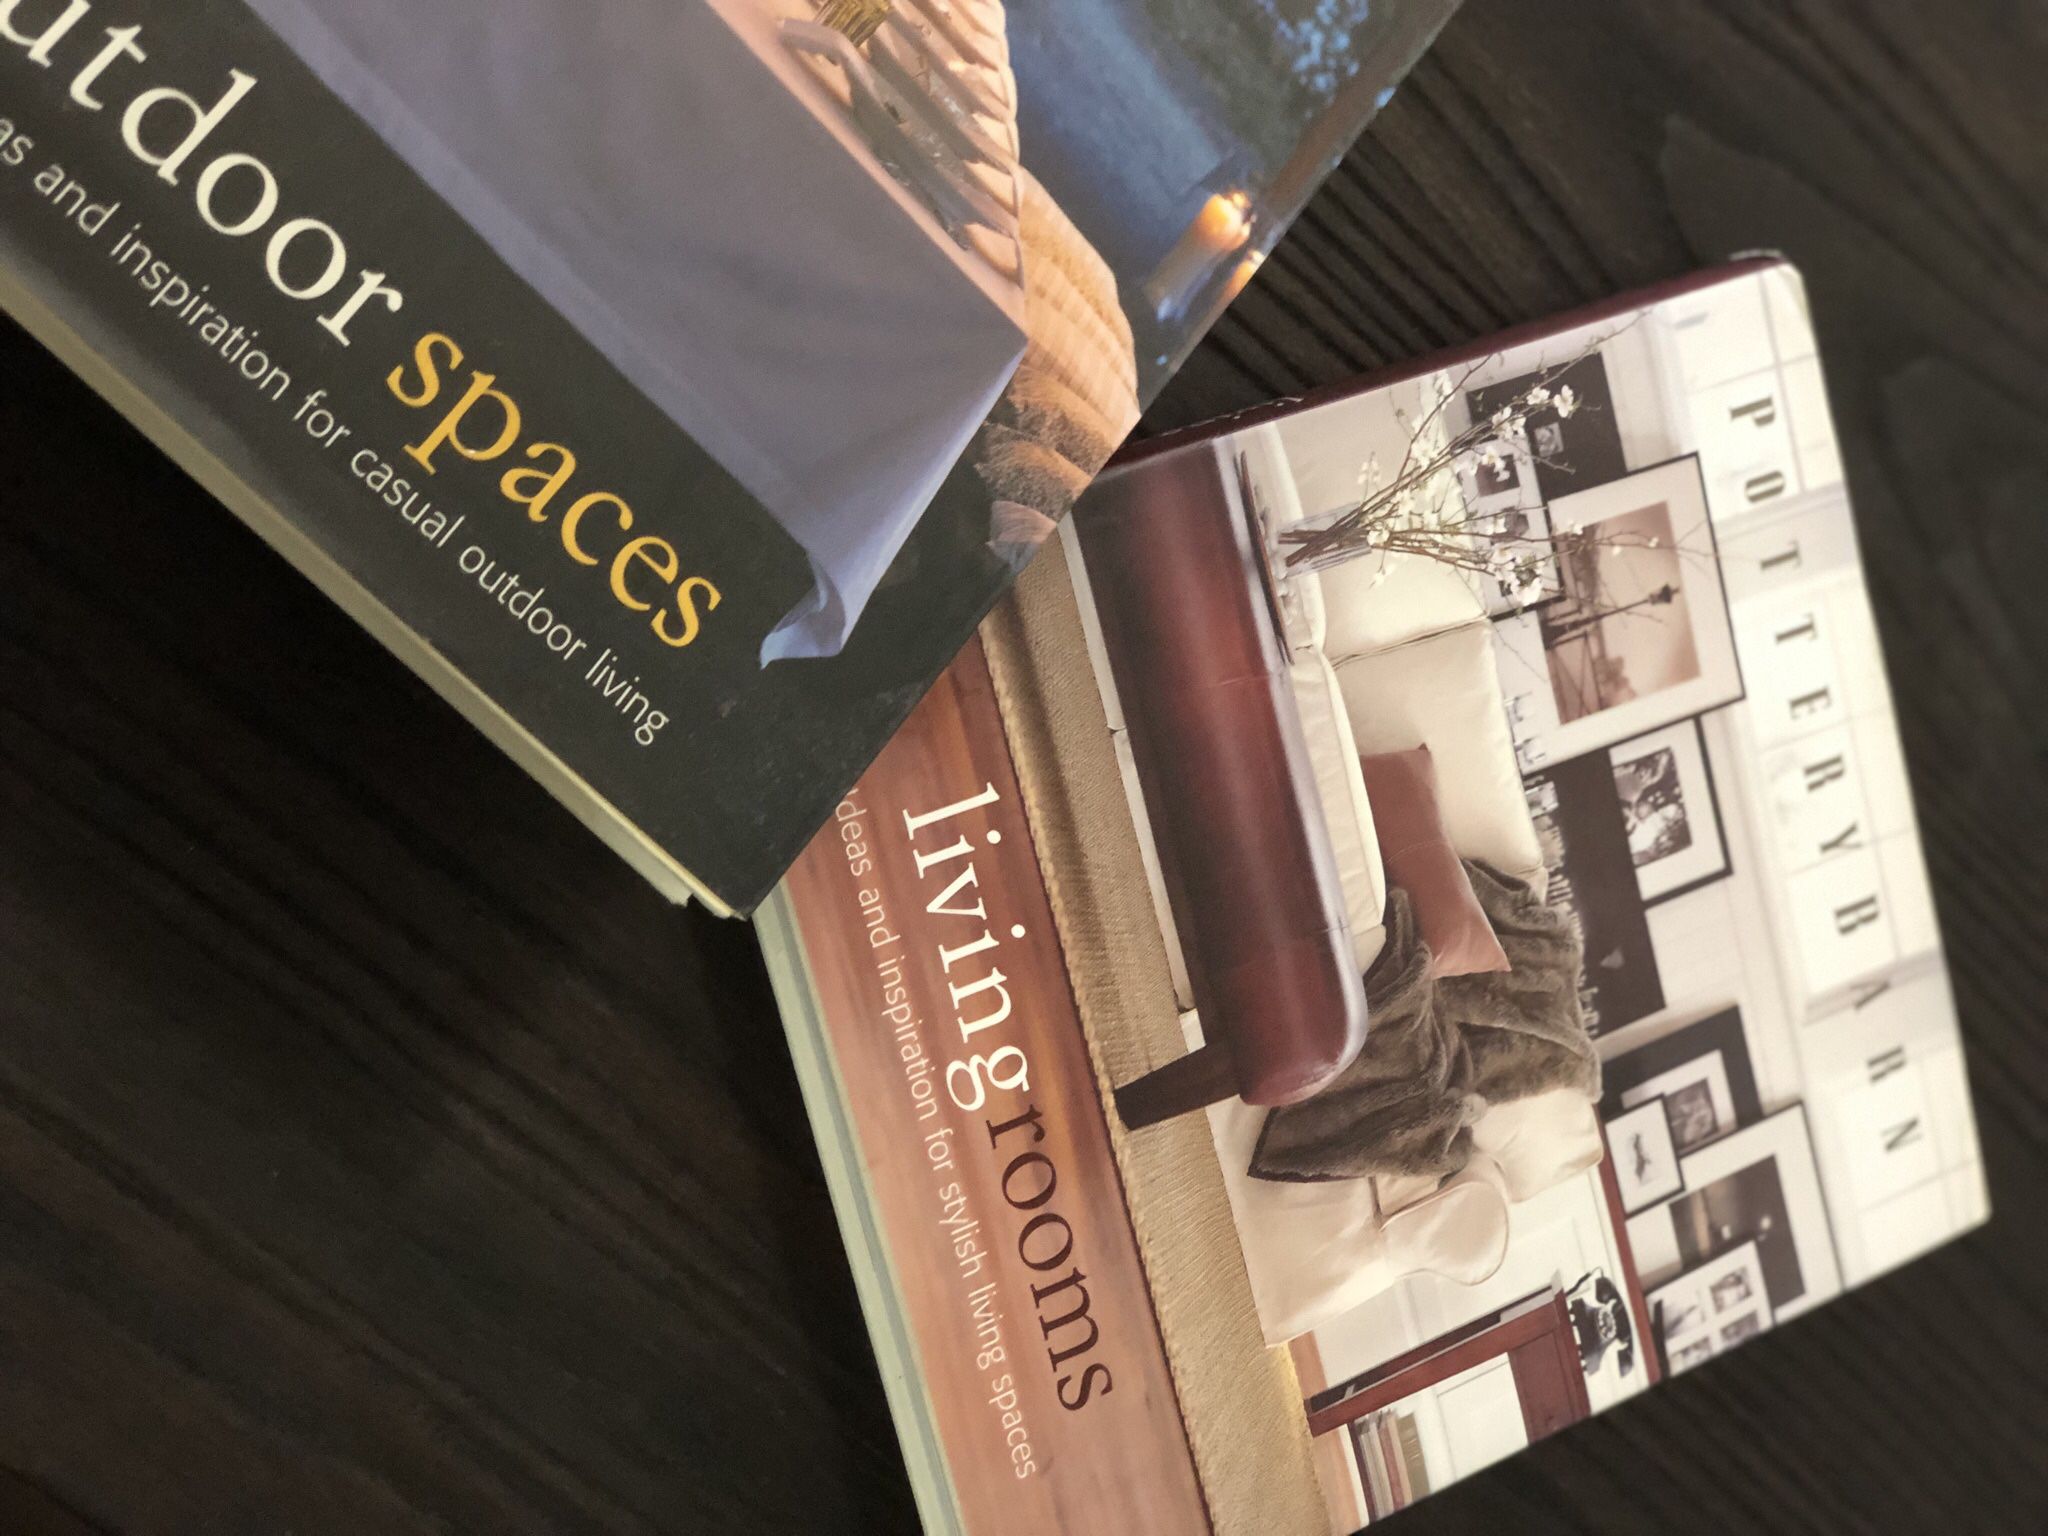 Pottery Barn Book Collection 